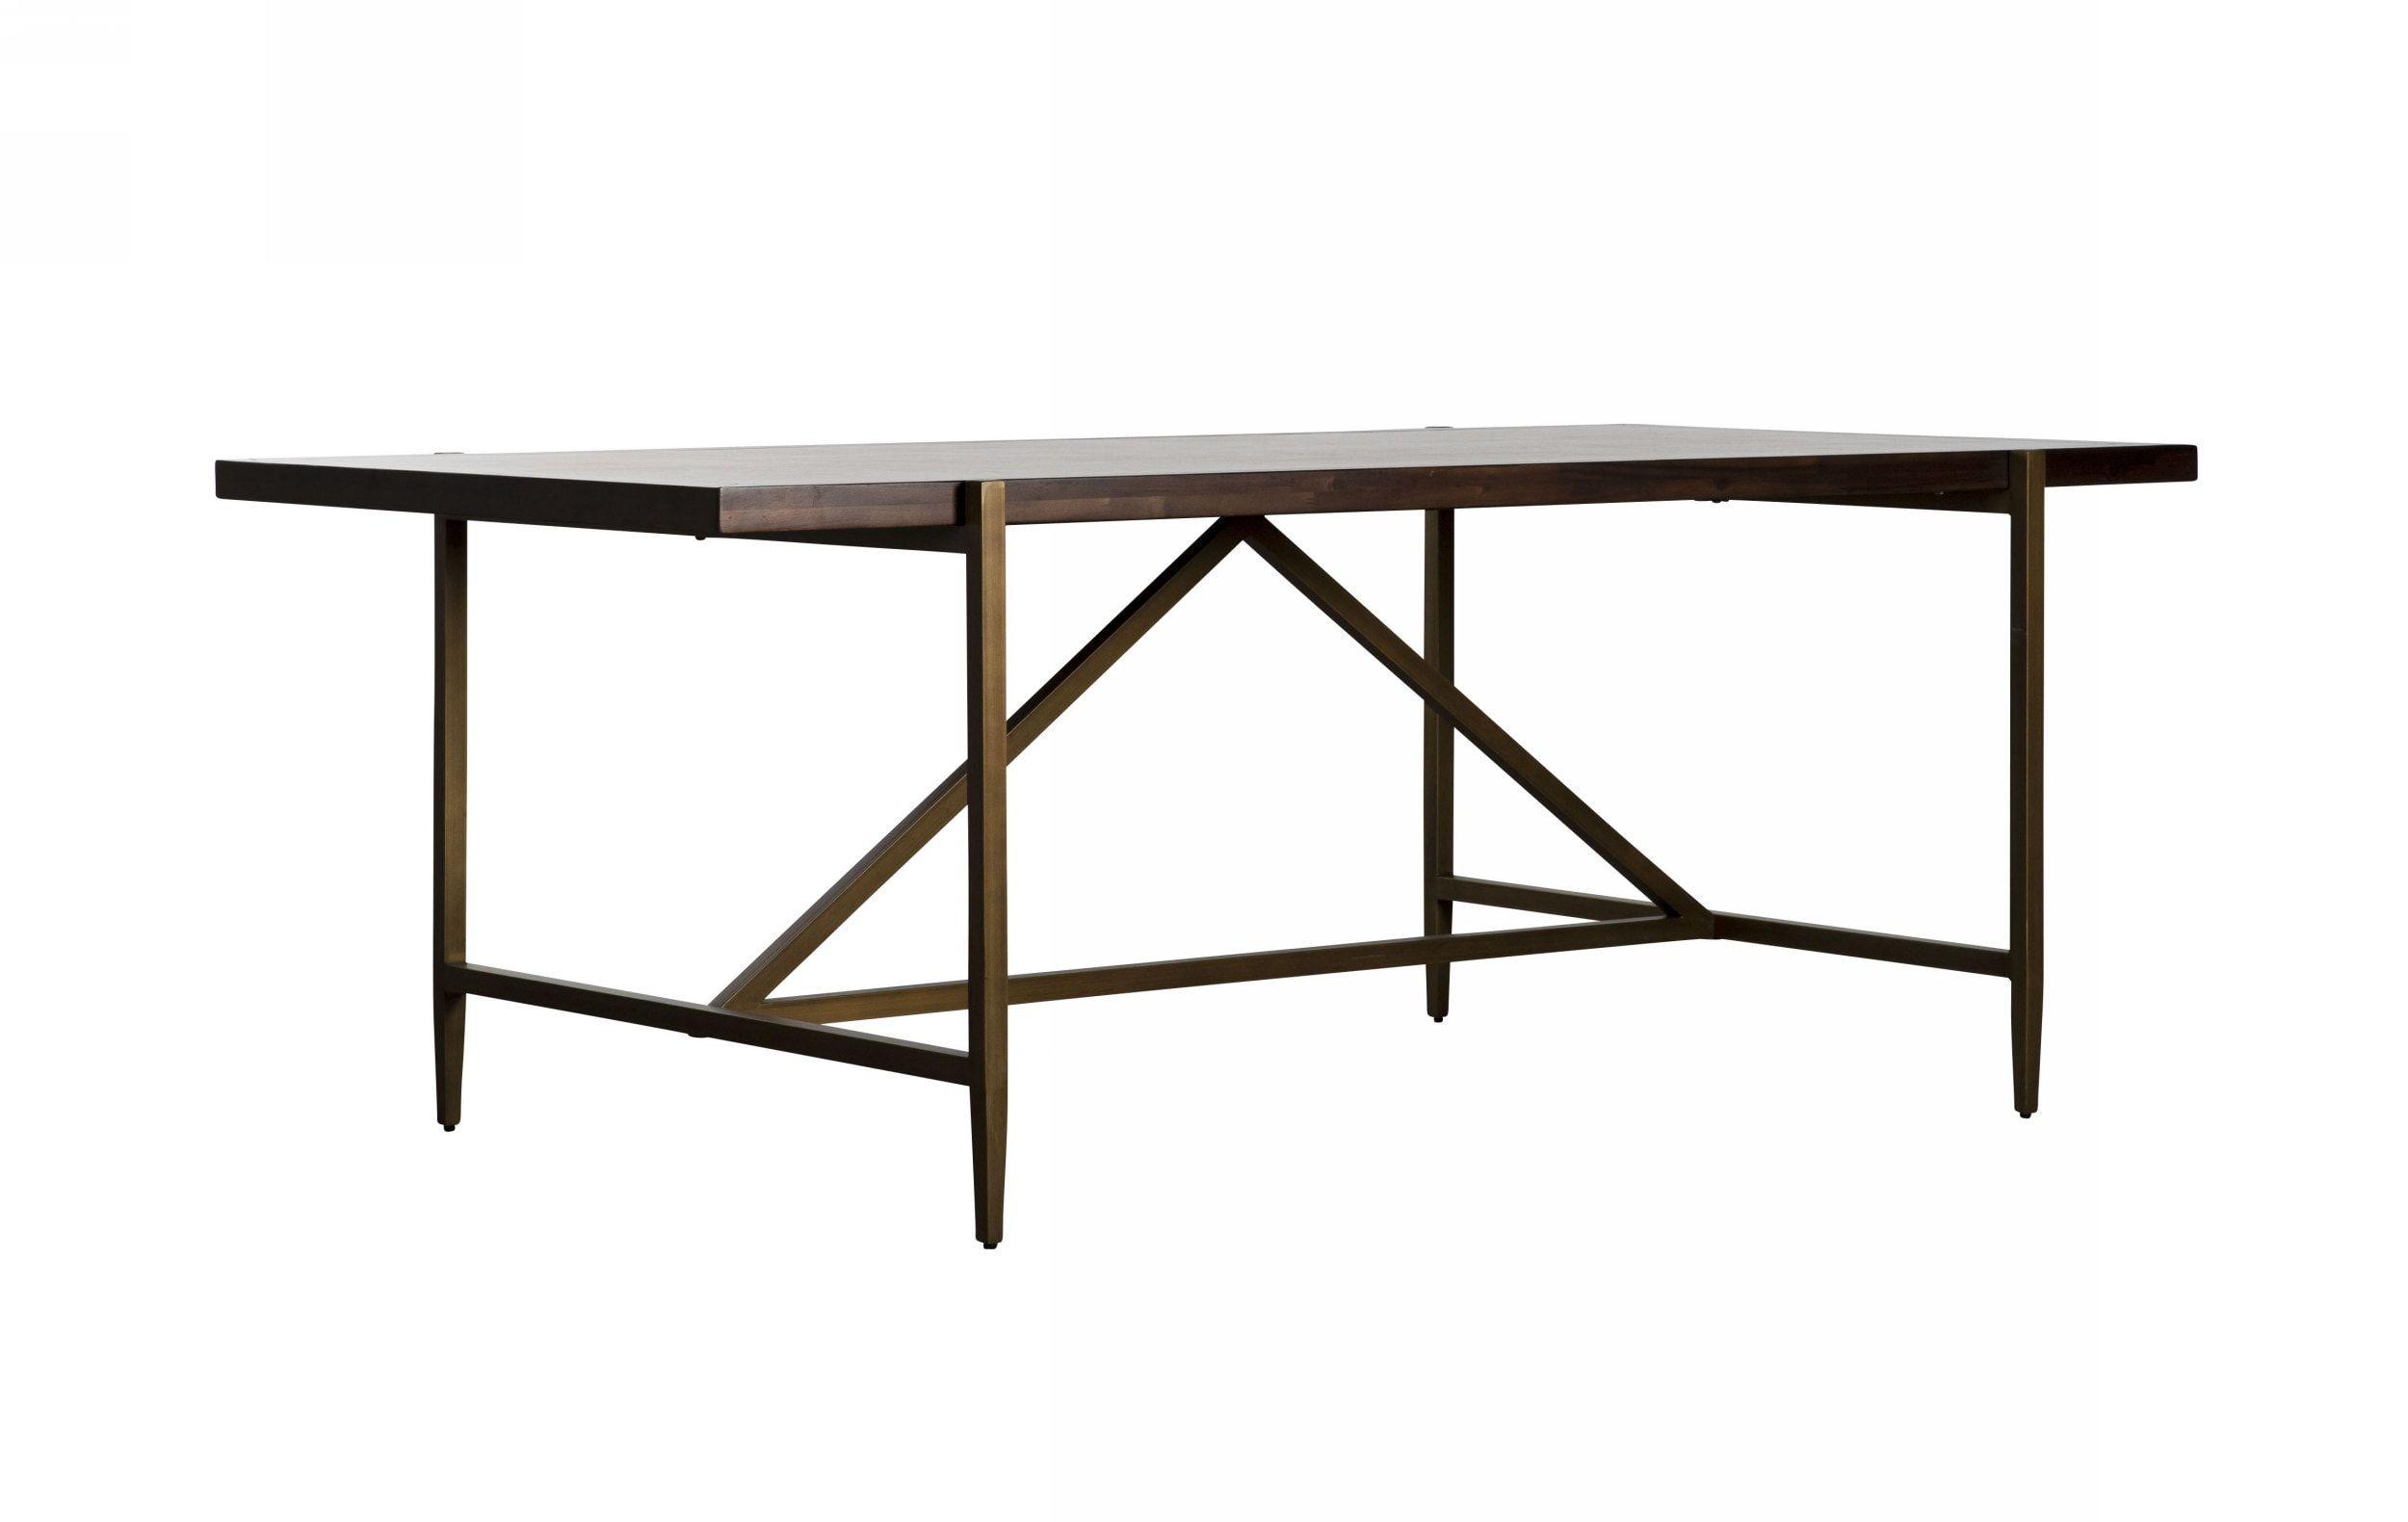 Contemporary, Modern Dining Table VGNX-MEMPHIS-20179 VGNX-MEMPHIS-20179 in Dark Brown 